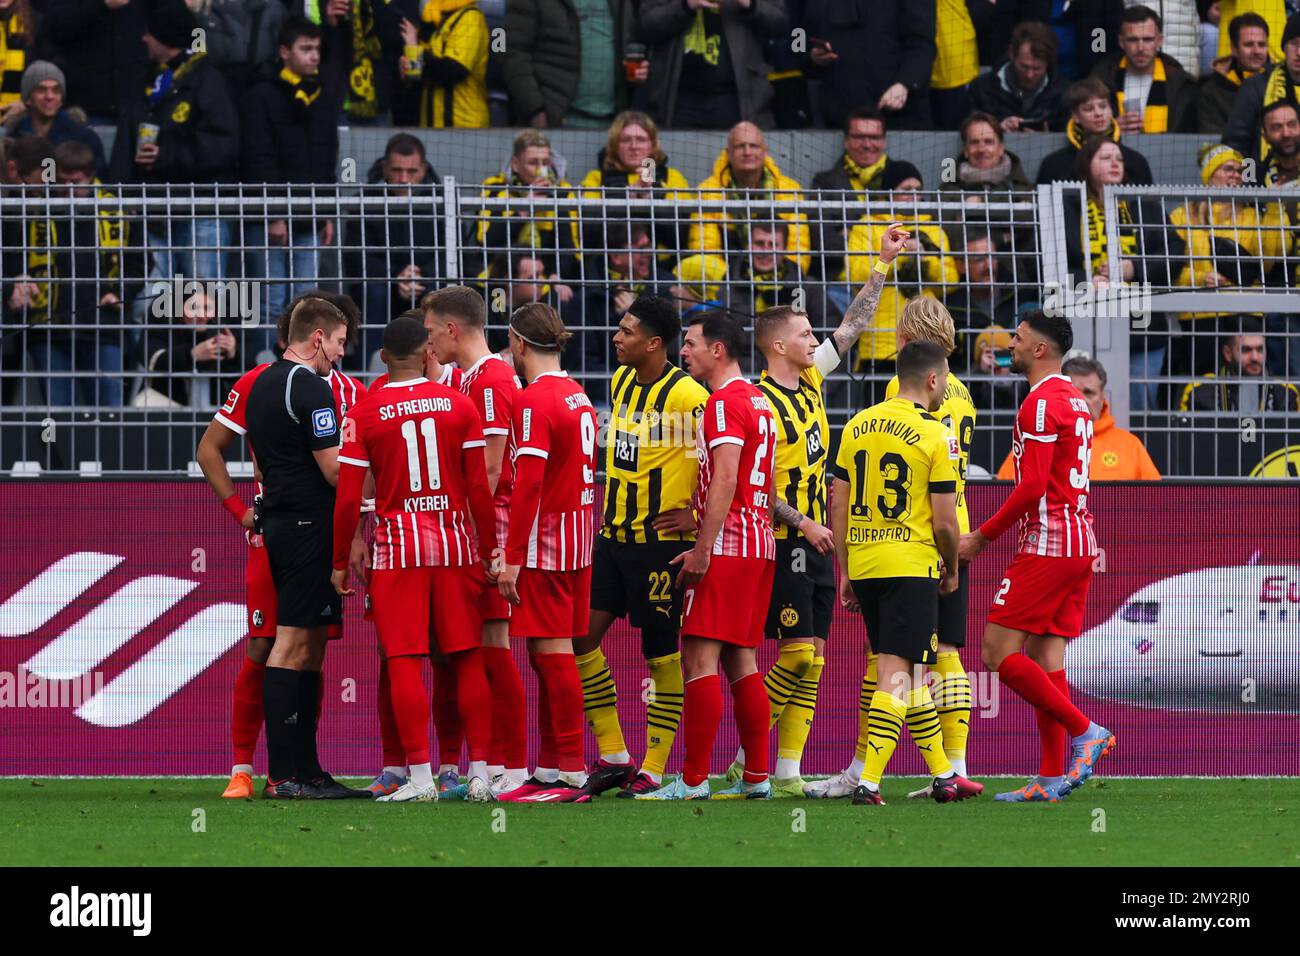 DORTMUND, GERMANY - FEBRUARY 4: Red card given by referee Robert Schroder for Kiliann Sildillia of SC Freiburg during the Bundesliga match between Borussia Dortmund and SC Freiburg at Signal Iduna Park on February 4, 2023 in Dortmund, Germany (Photo by Marcel ter Bals/Orange Pictures) Stock Photo